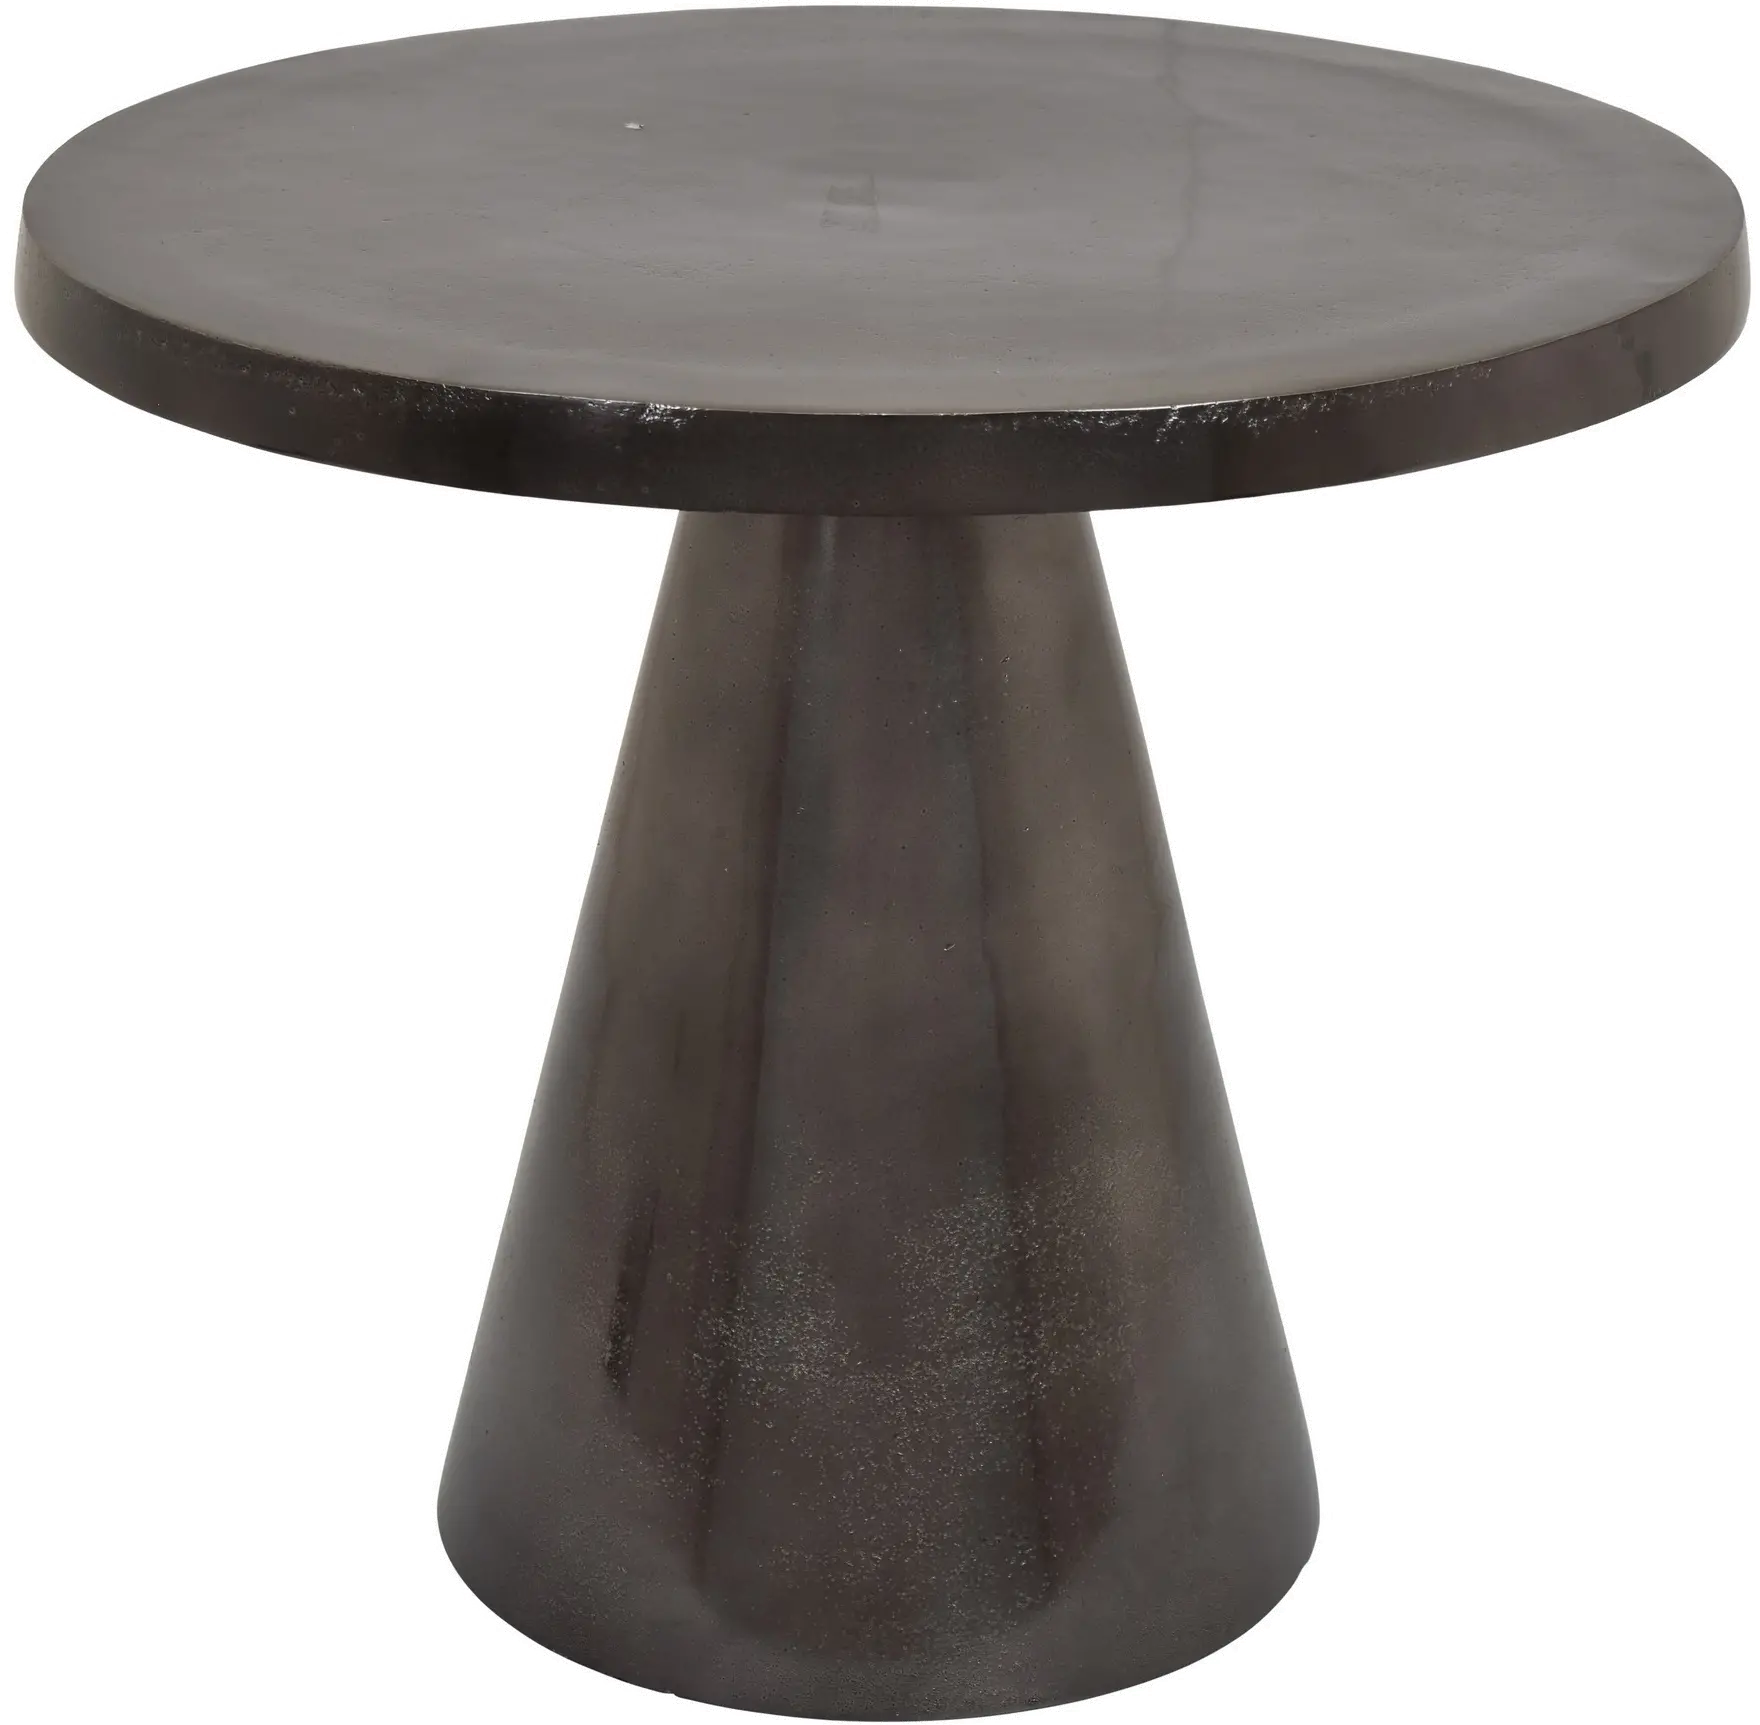 16 Inch Round Metal Table